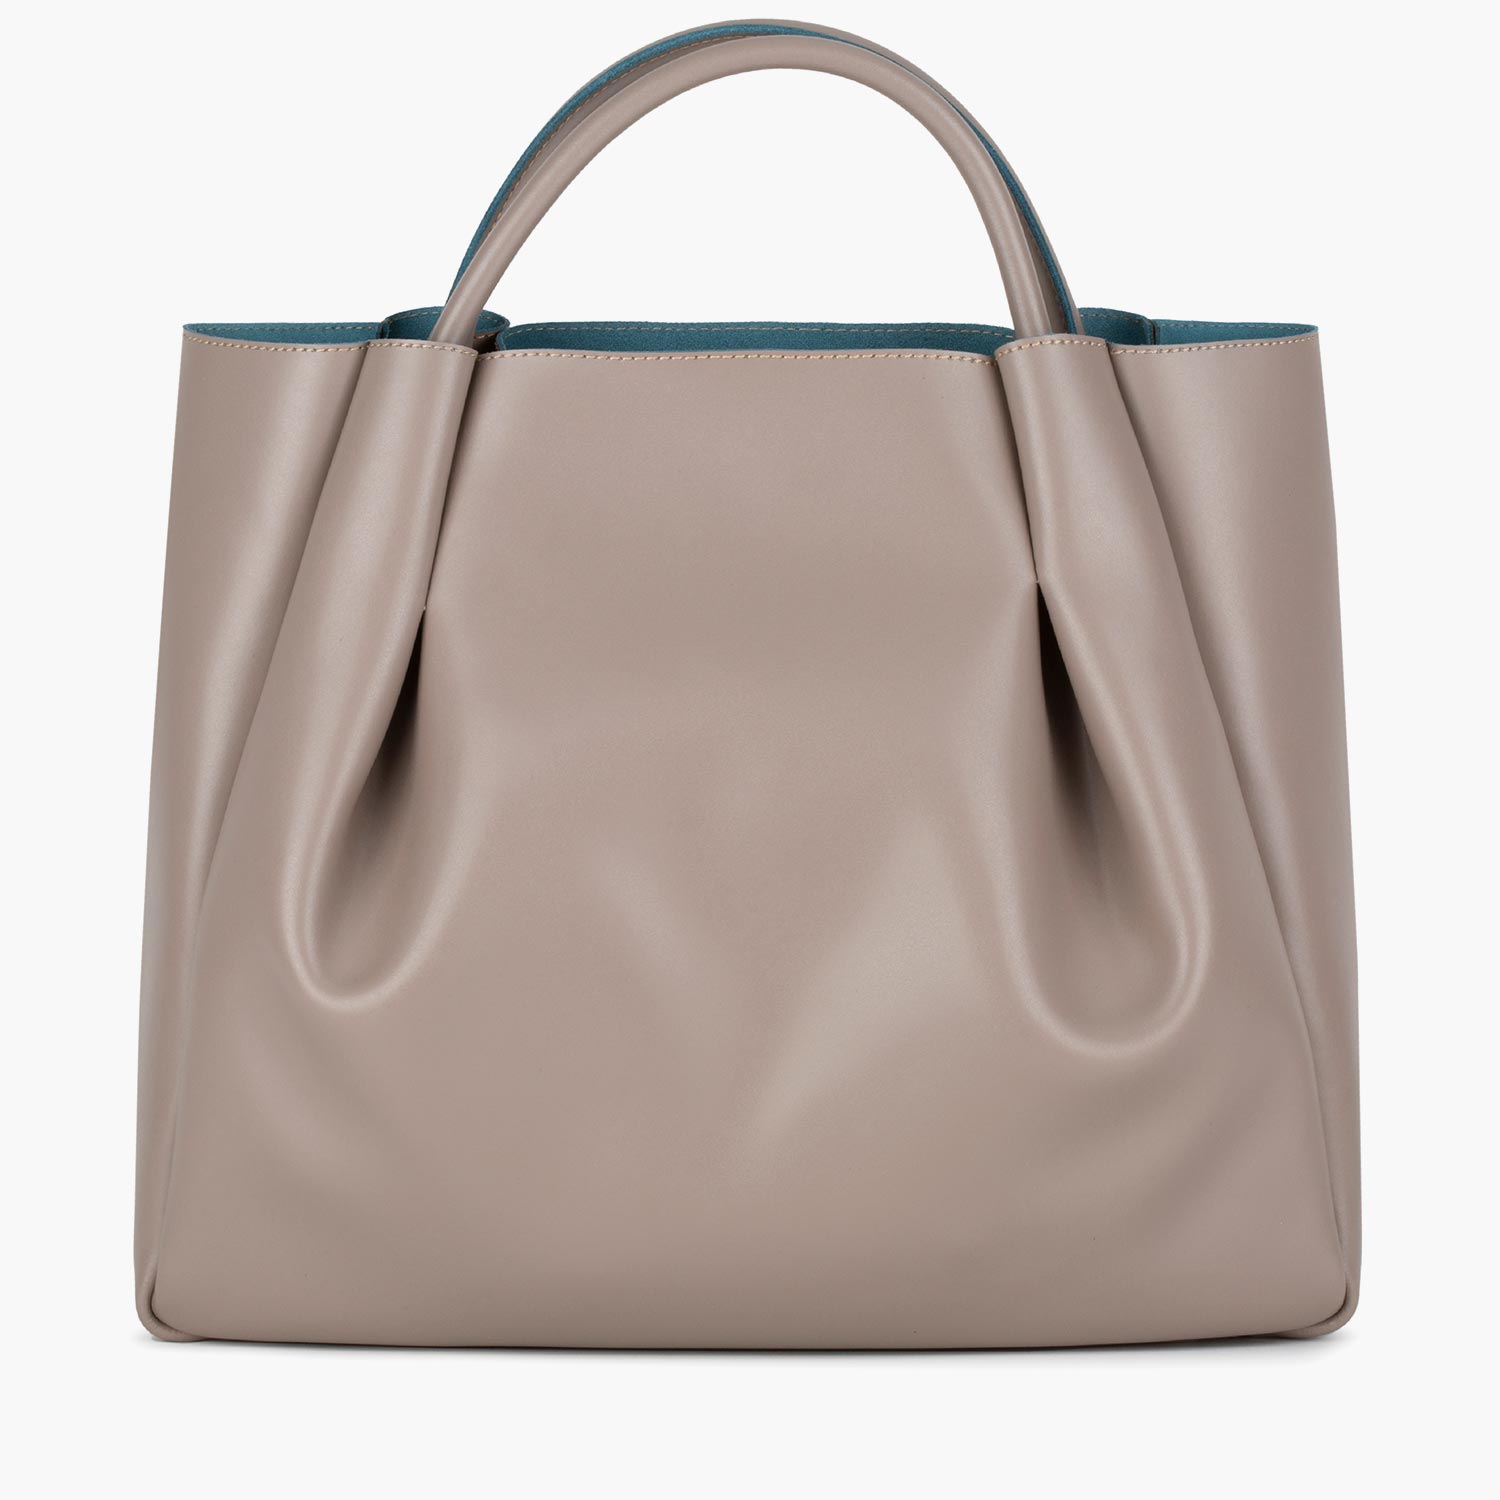 PPT - Why Choose Vegan Leather Handbags? PowerPoint Presentation, free  download - ID:10410403